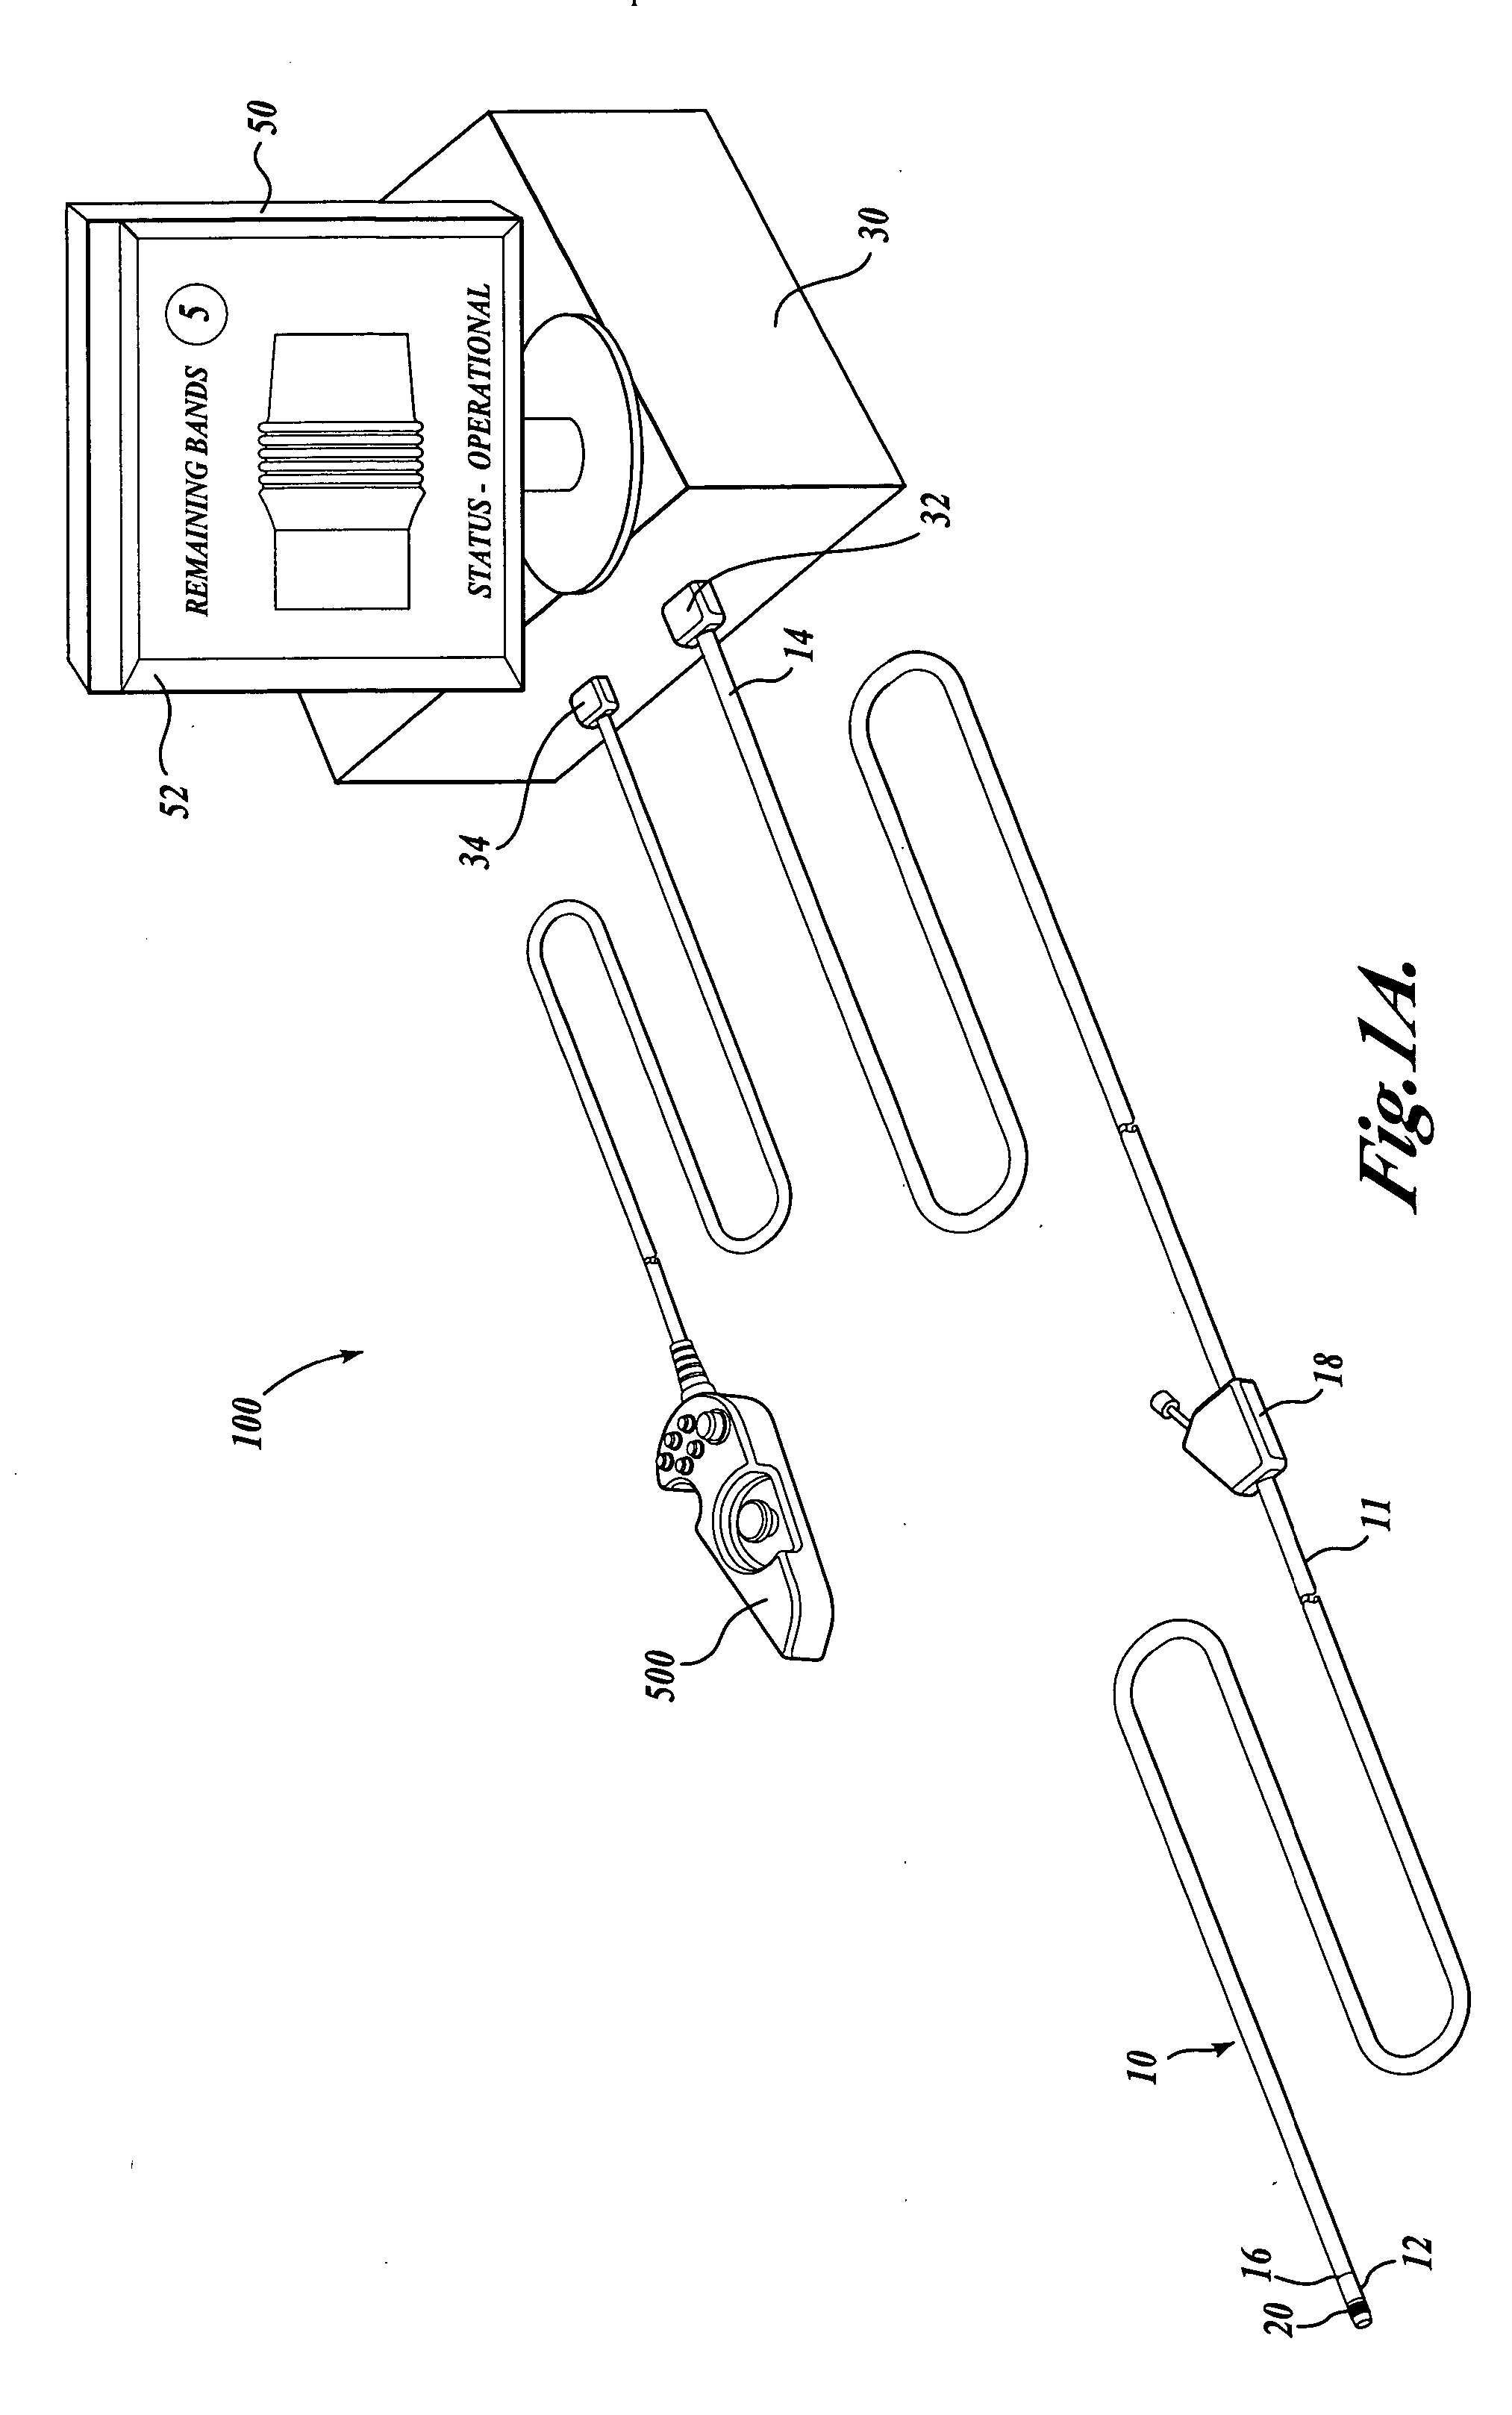 Endoscopic apparatus with integrated variceal ligation device